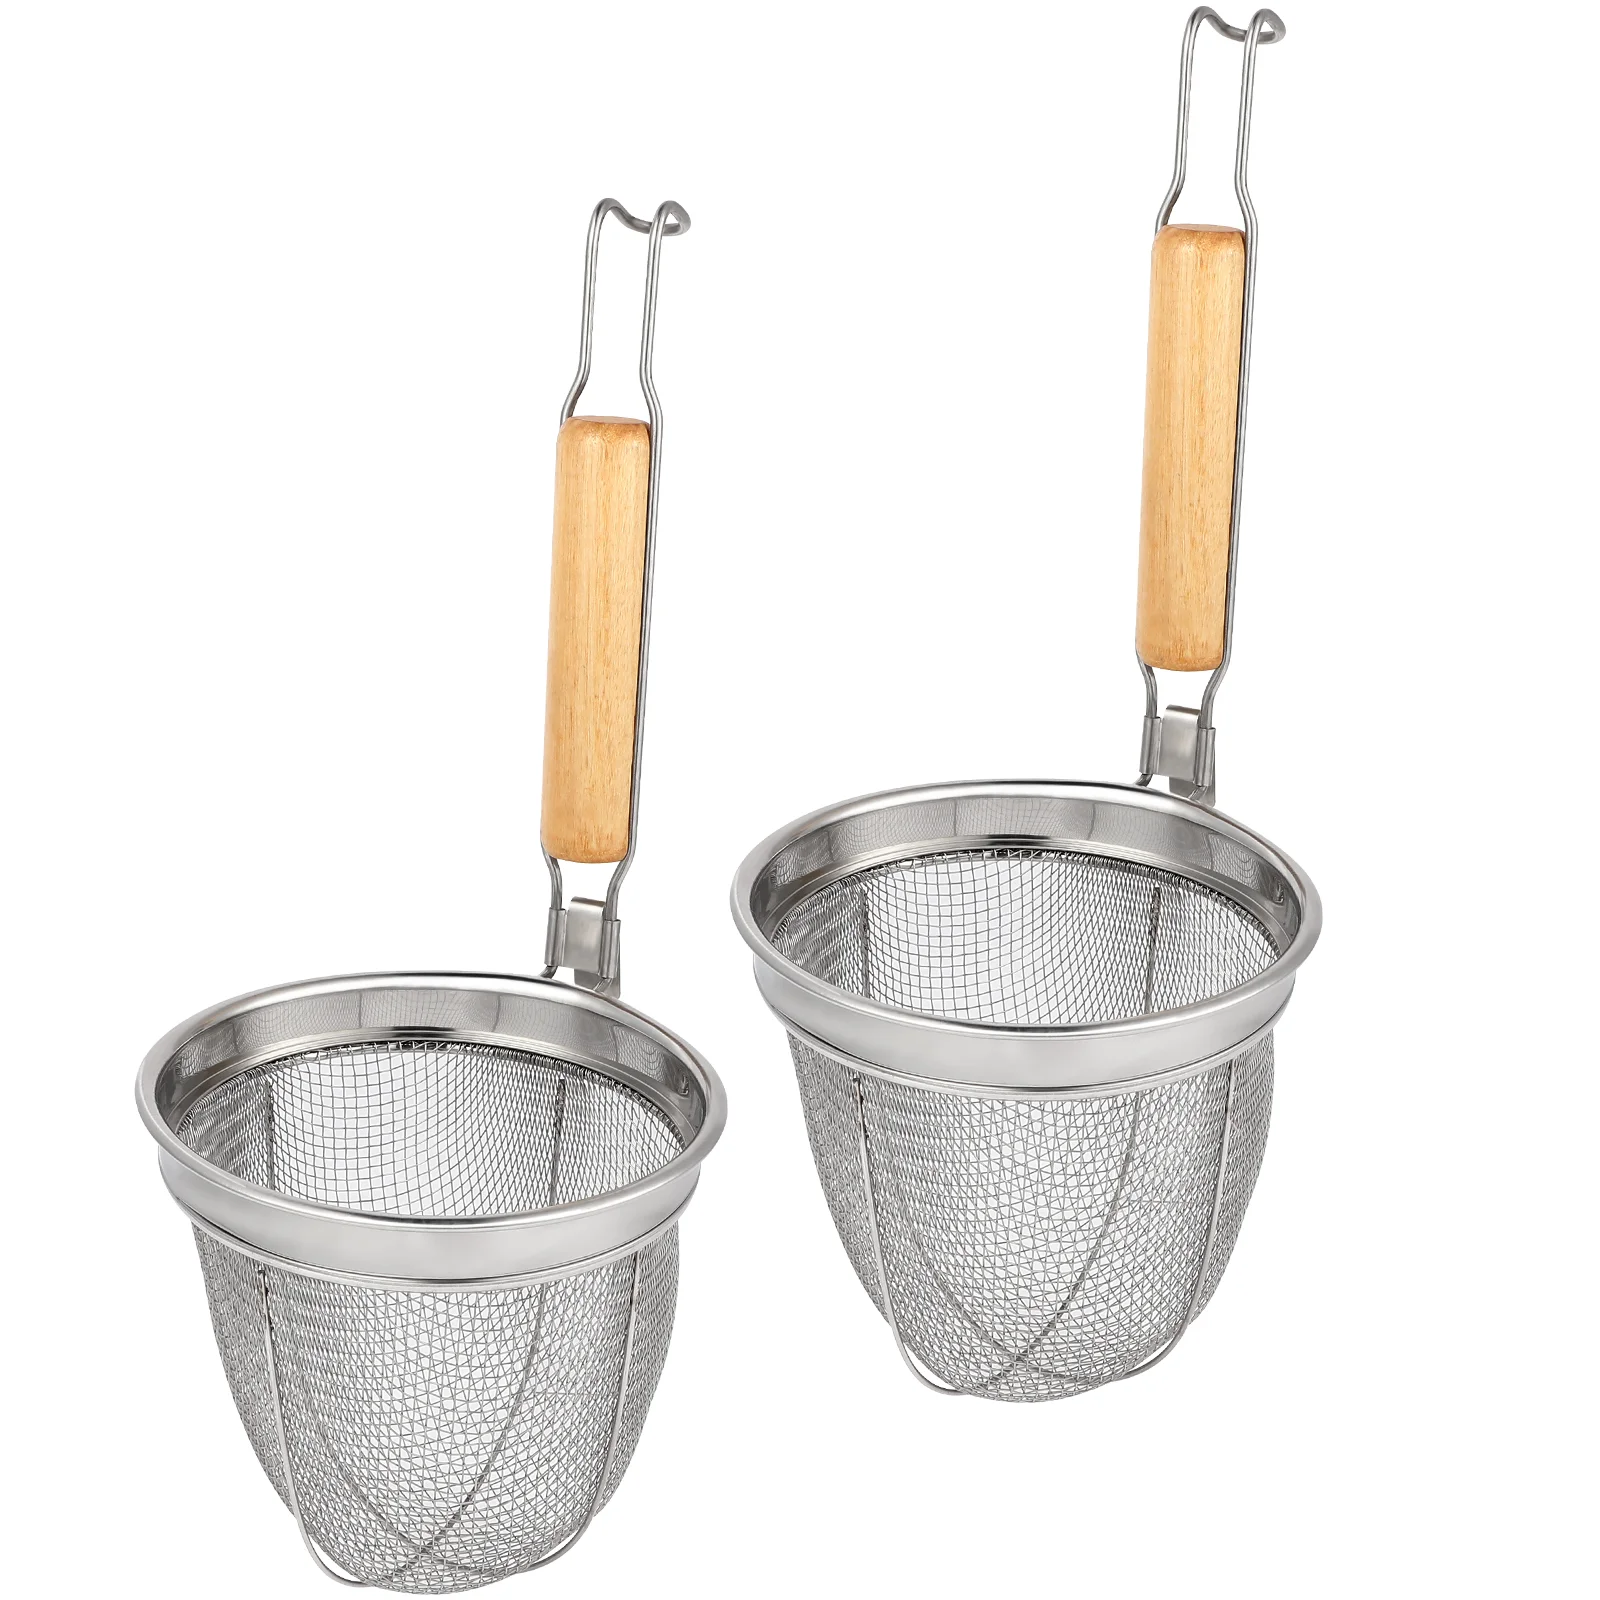 

Strainer Basket Pasta Noodle Pot Mesh Kitchen Strainers Spaghetti Handle Cooking Hot Fine Tools Insert Cooker Utensils Stainless